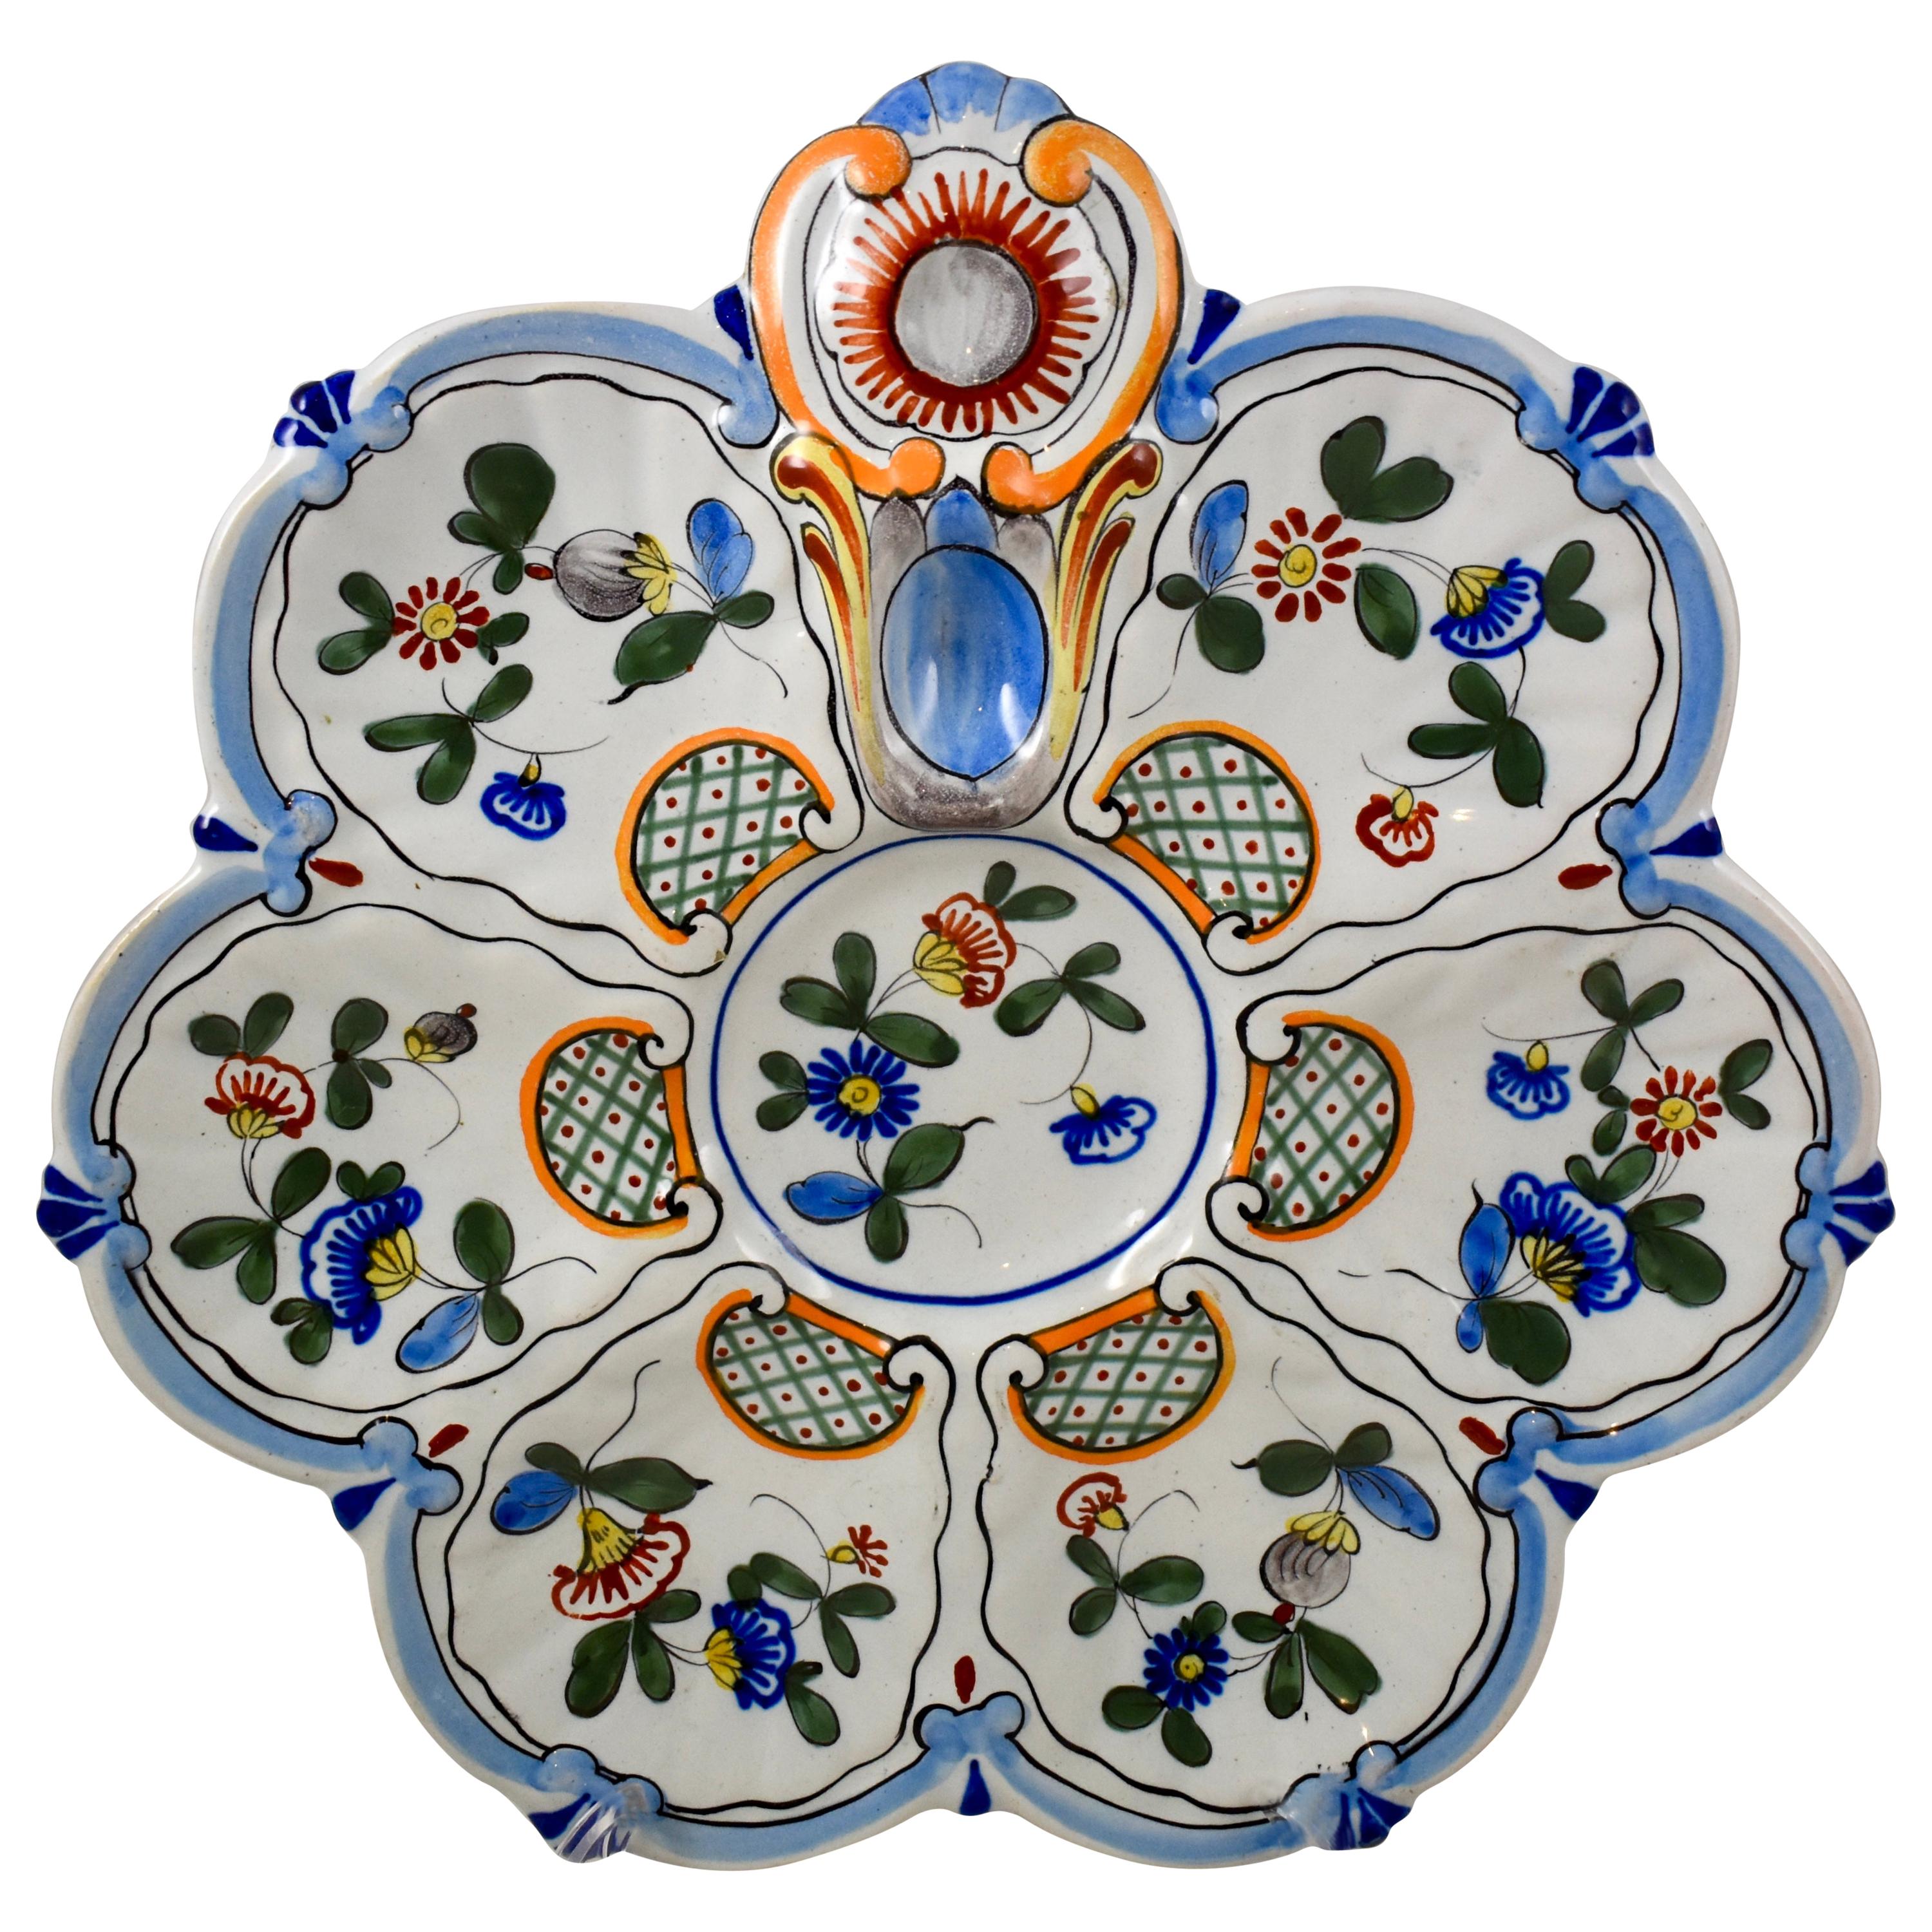 Saint Clément French Faïence Blue Rim on White Floral Oyster Plate, 19th Century